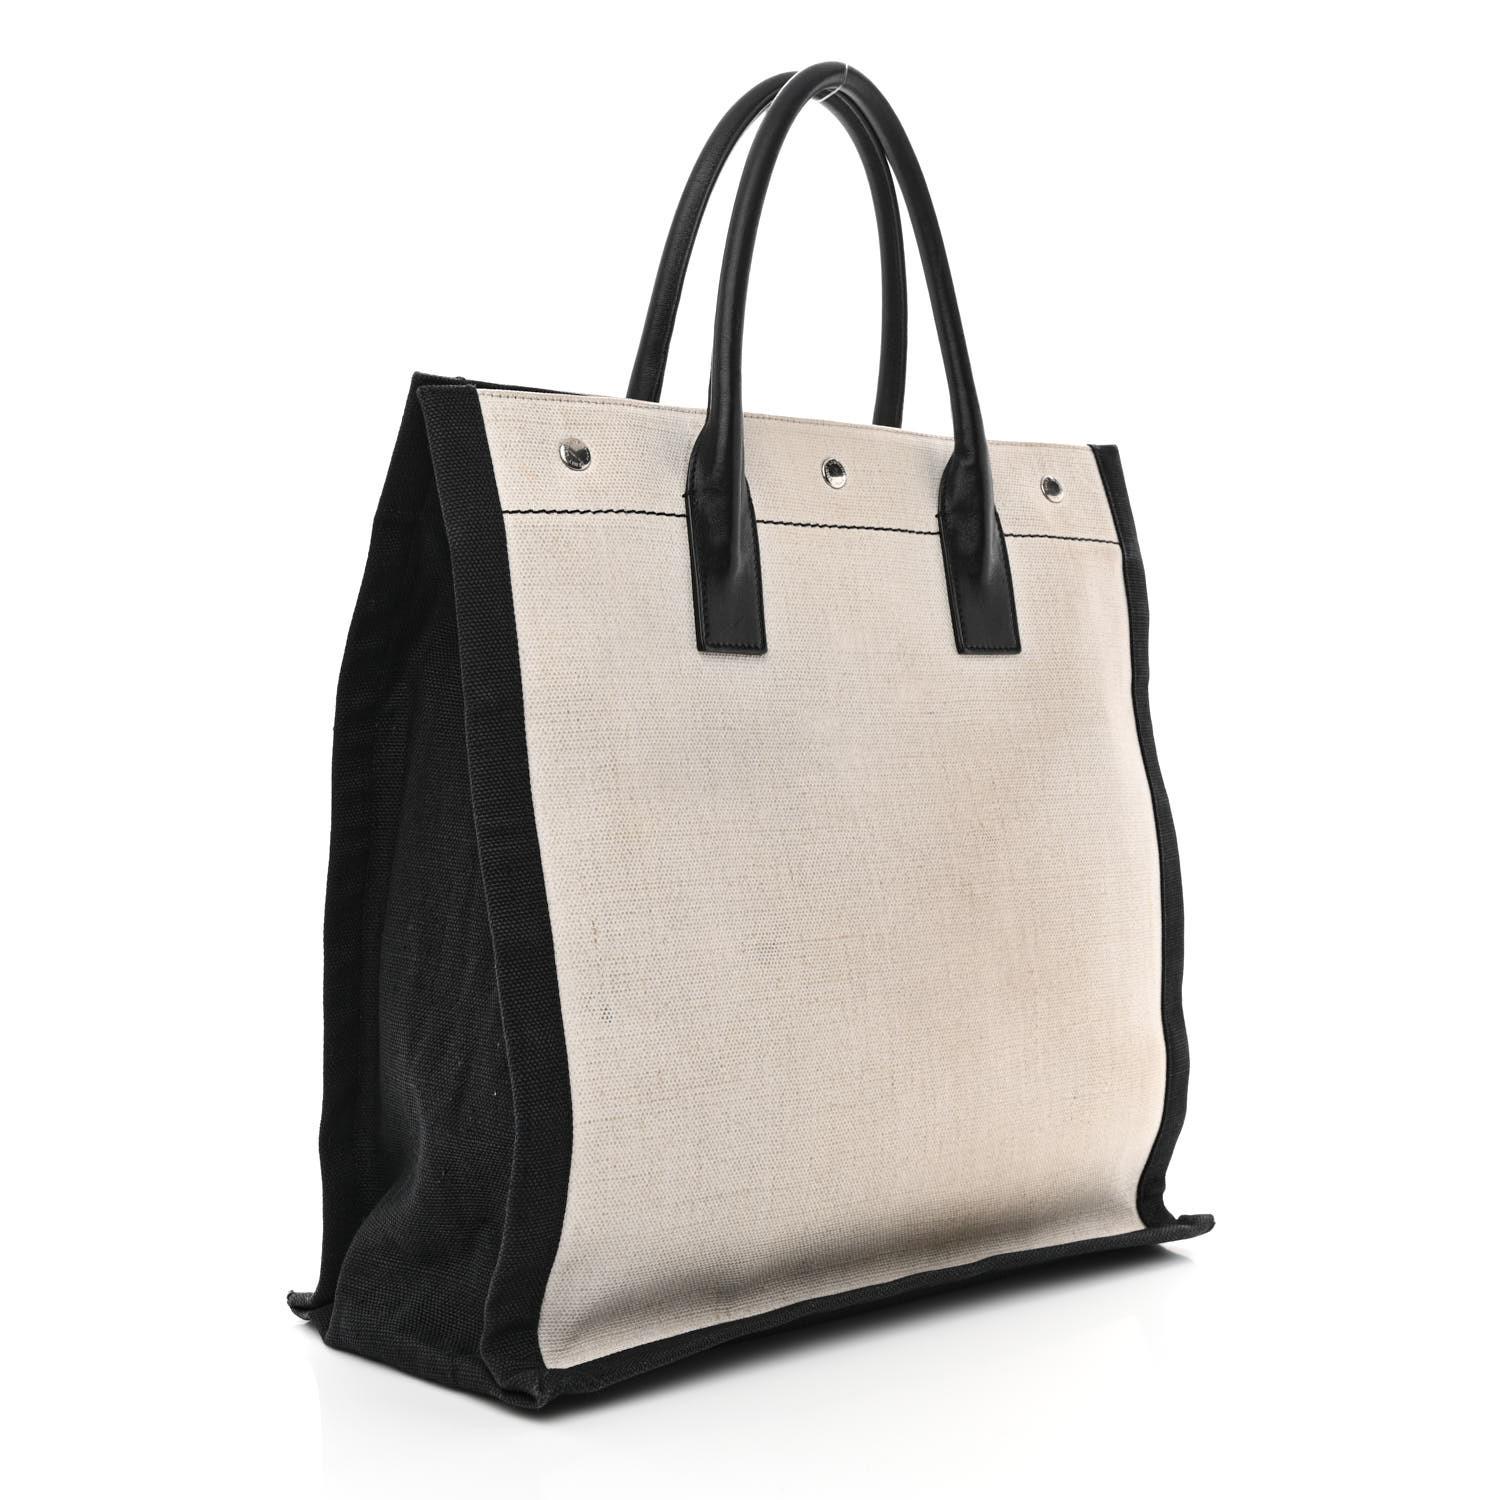 Saint Laurent Linen White Black Rive Gauche North South Tote In New Condition For Sale In Montreal, Quebec